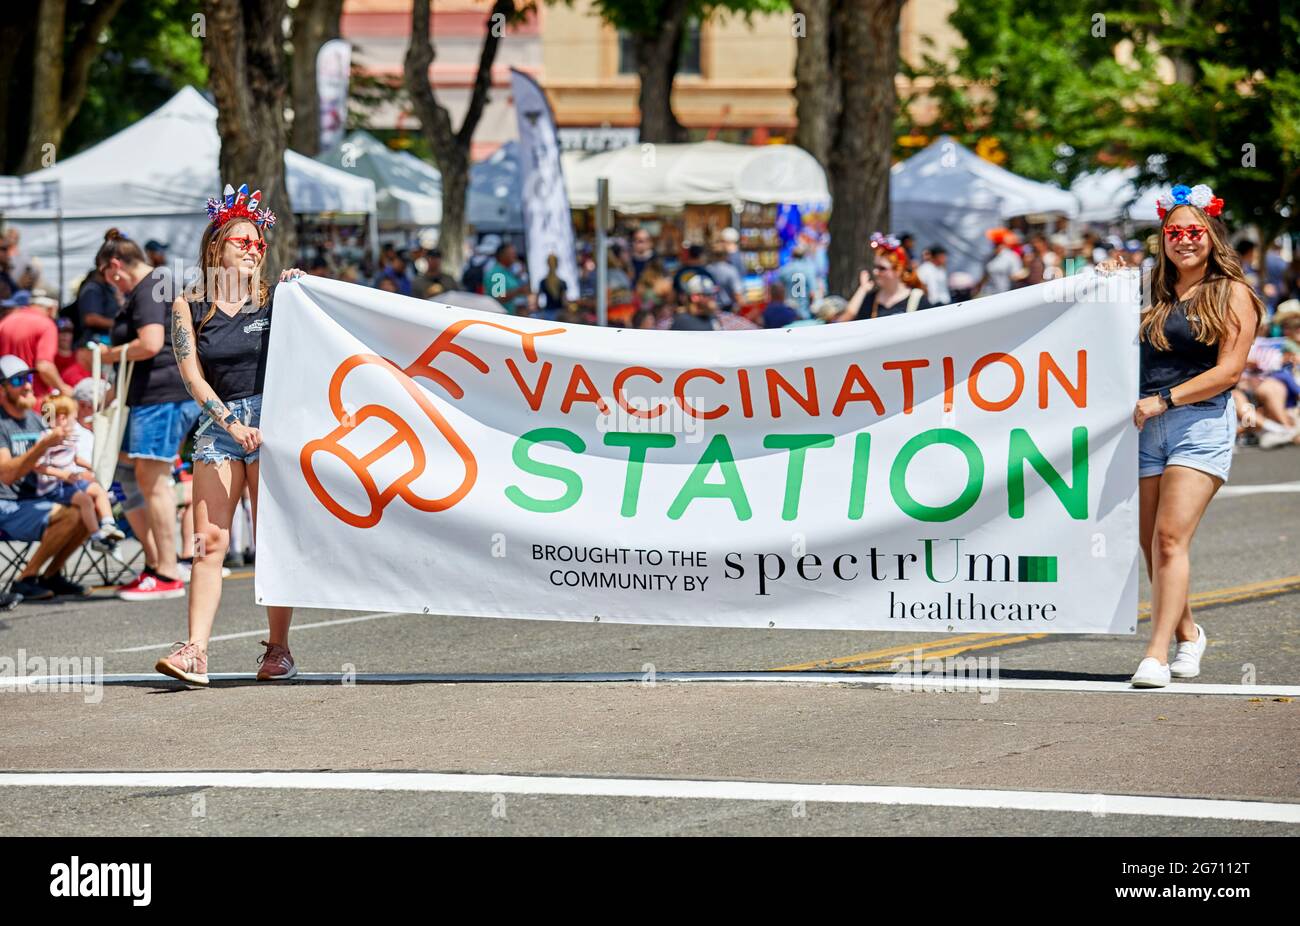 Prescott, Arizona, USA - July 3, 2021: Two girls carrying a vaccination station sign by Spectrum Health while marching in the 4th of July parade Stock Photo